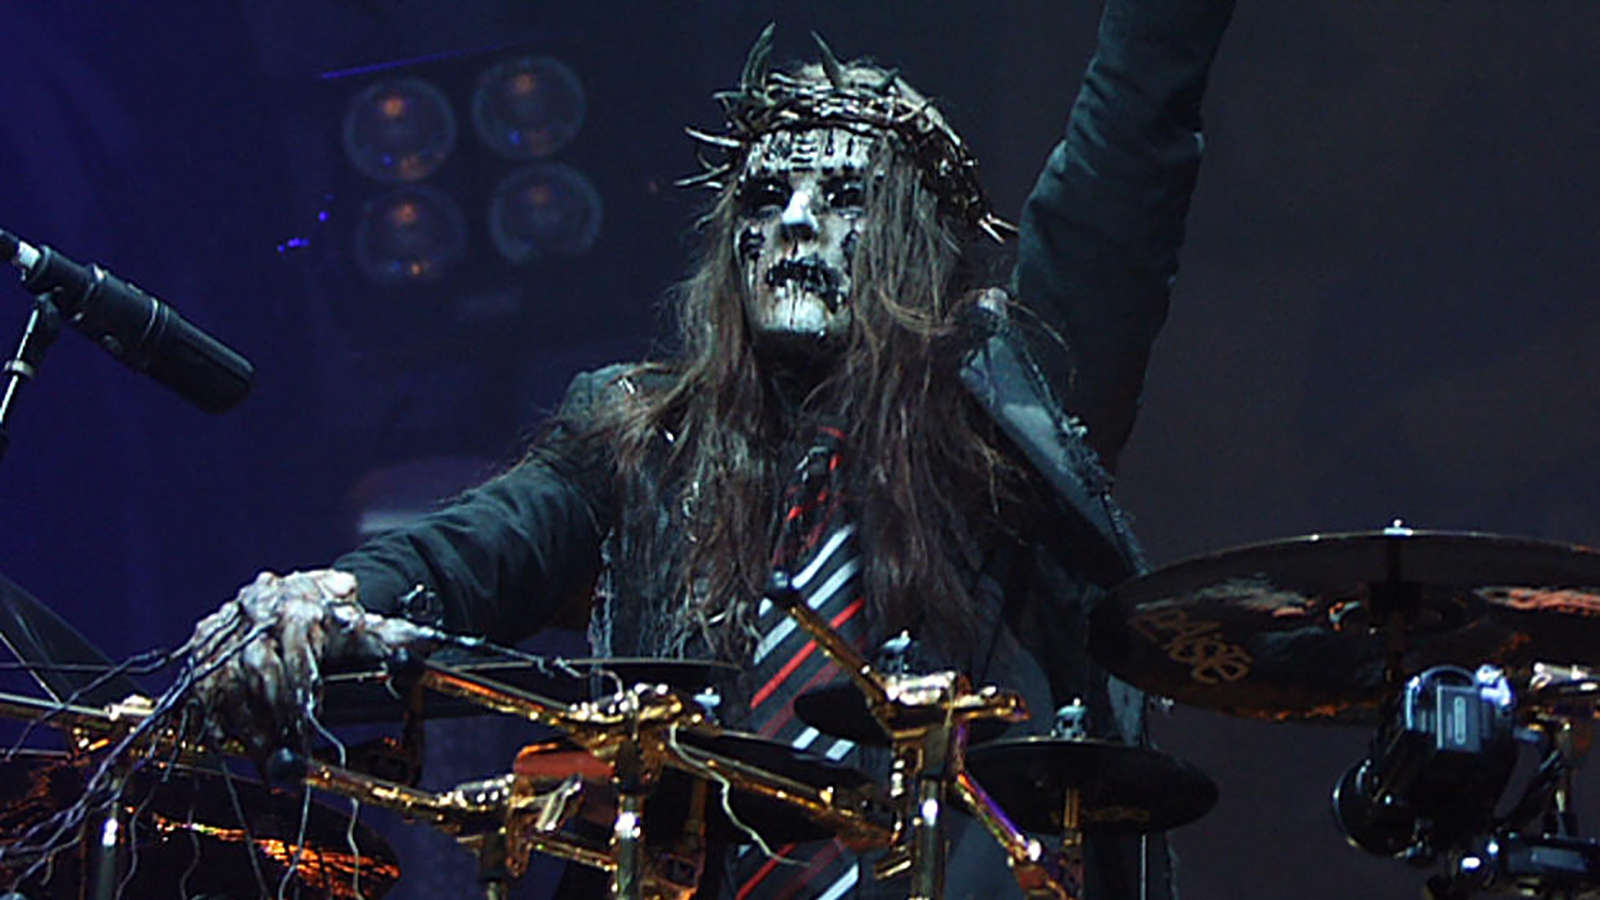 You are currently viewing Πέθανε σε ηλικία 46 ετών ο Joey Jordison, πρώην ντράμερ των SLIPKNOT!!! :-(